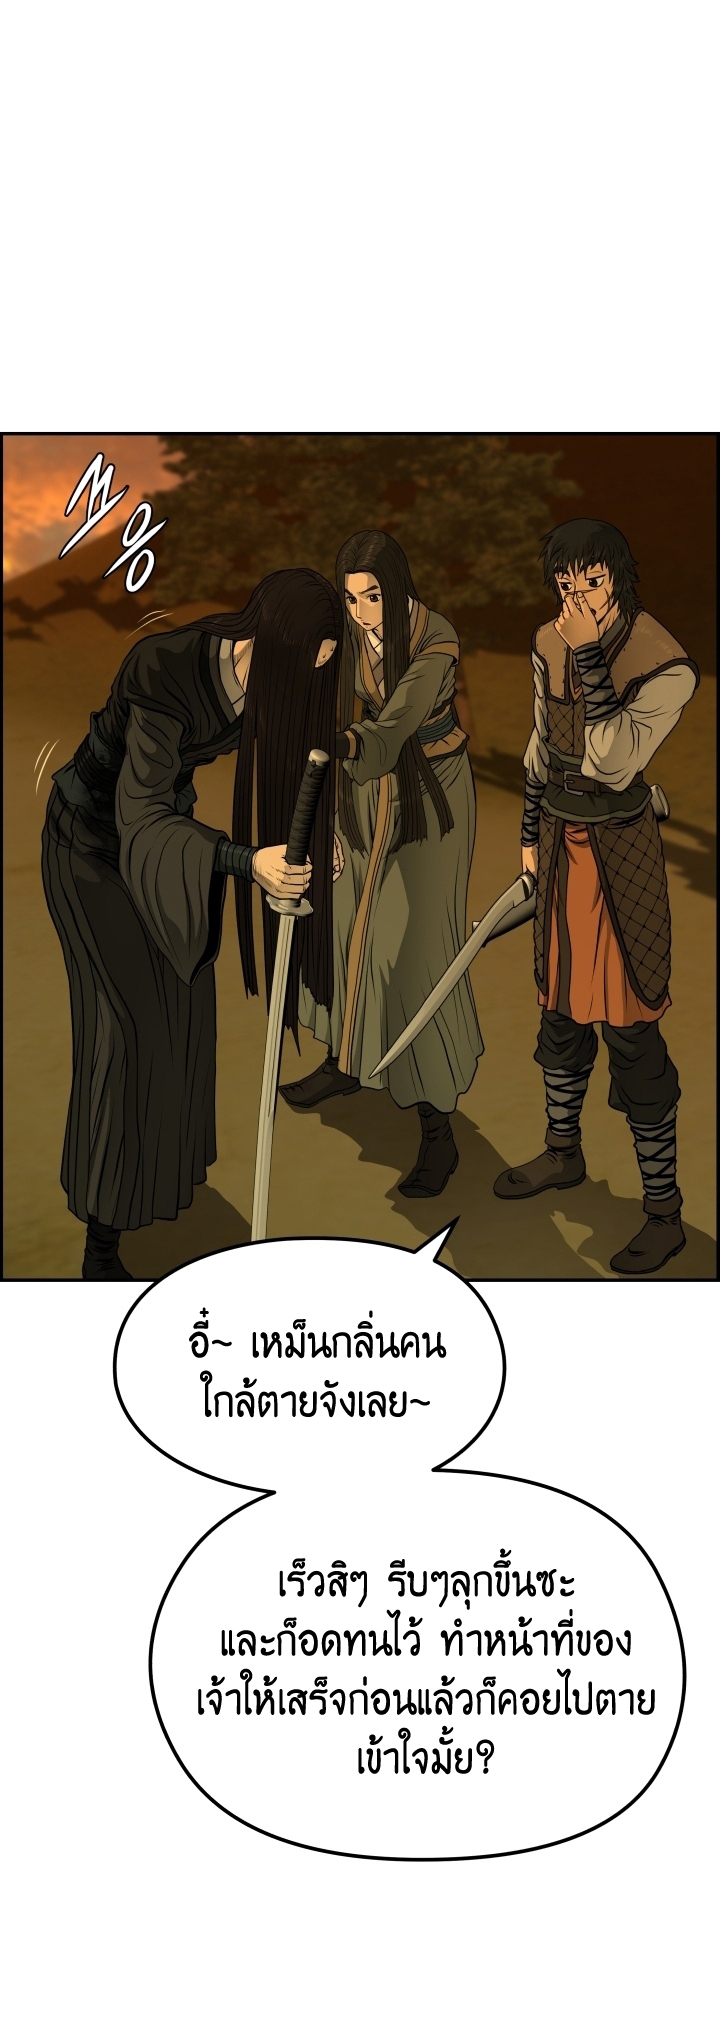 Blade of Wind and Thunder 28 (31)